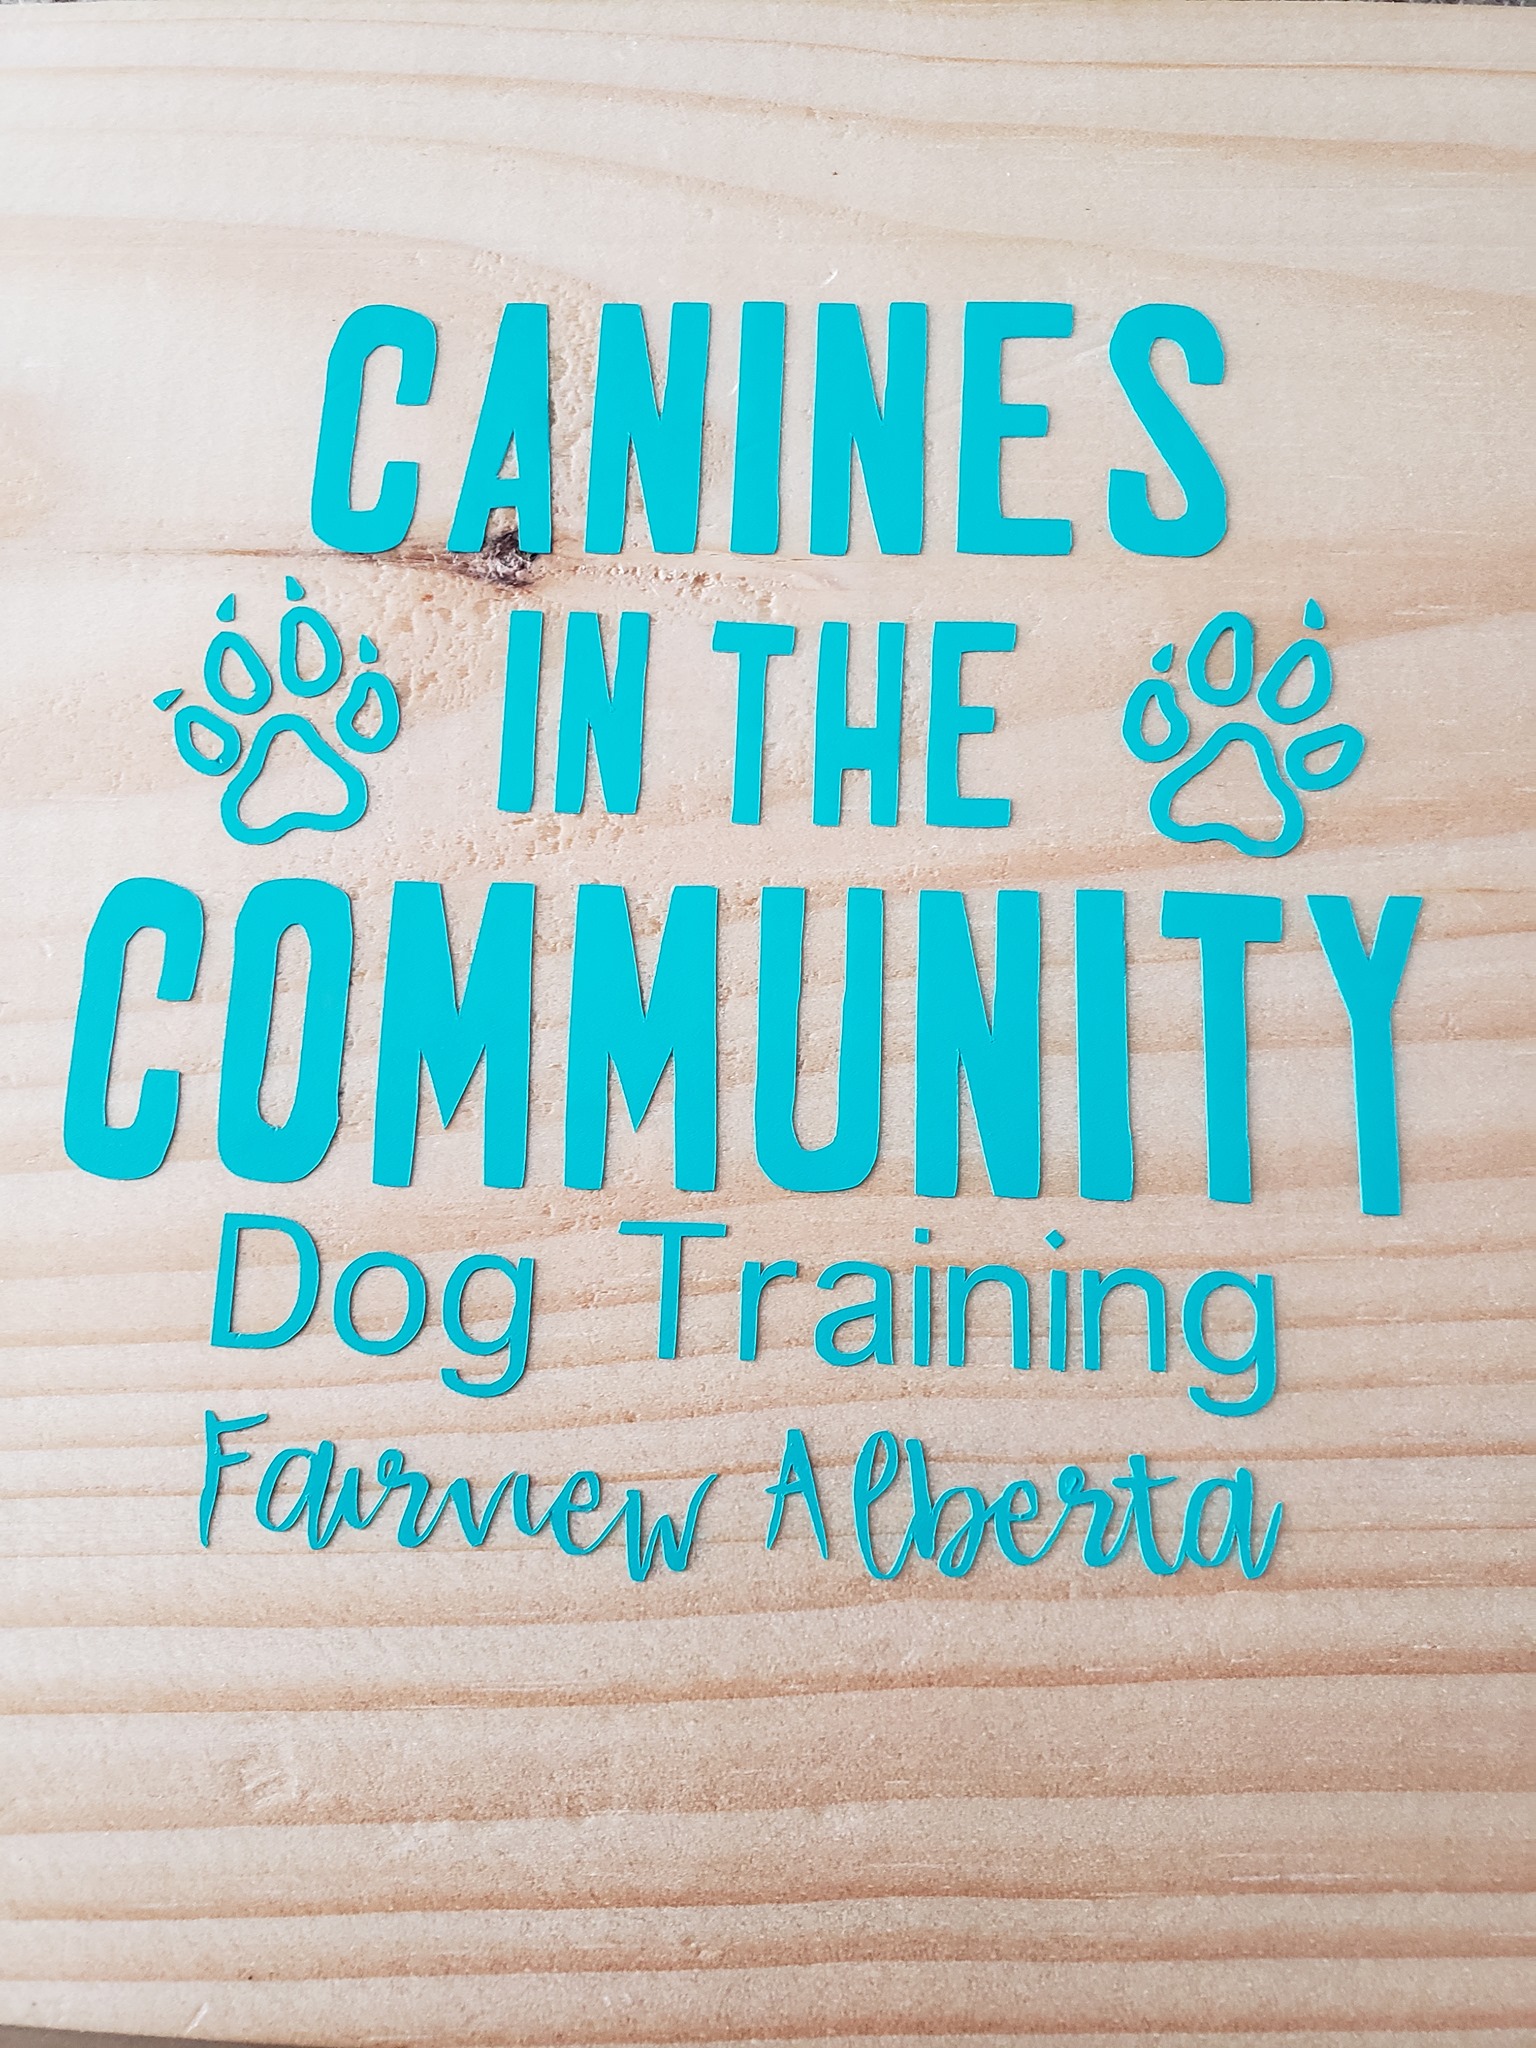 Canines in the Community